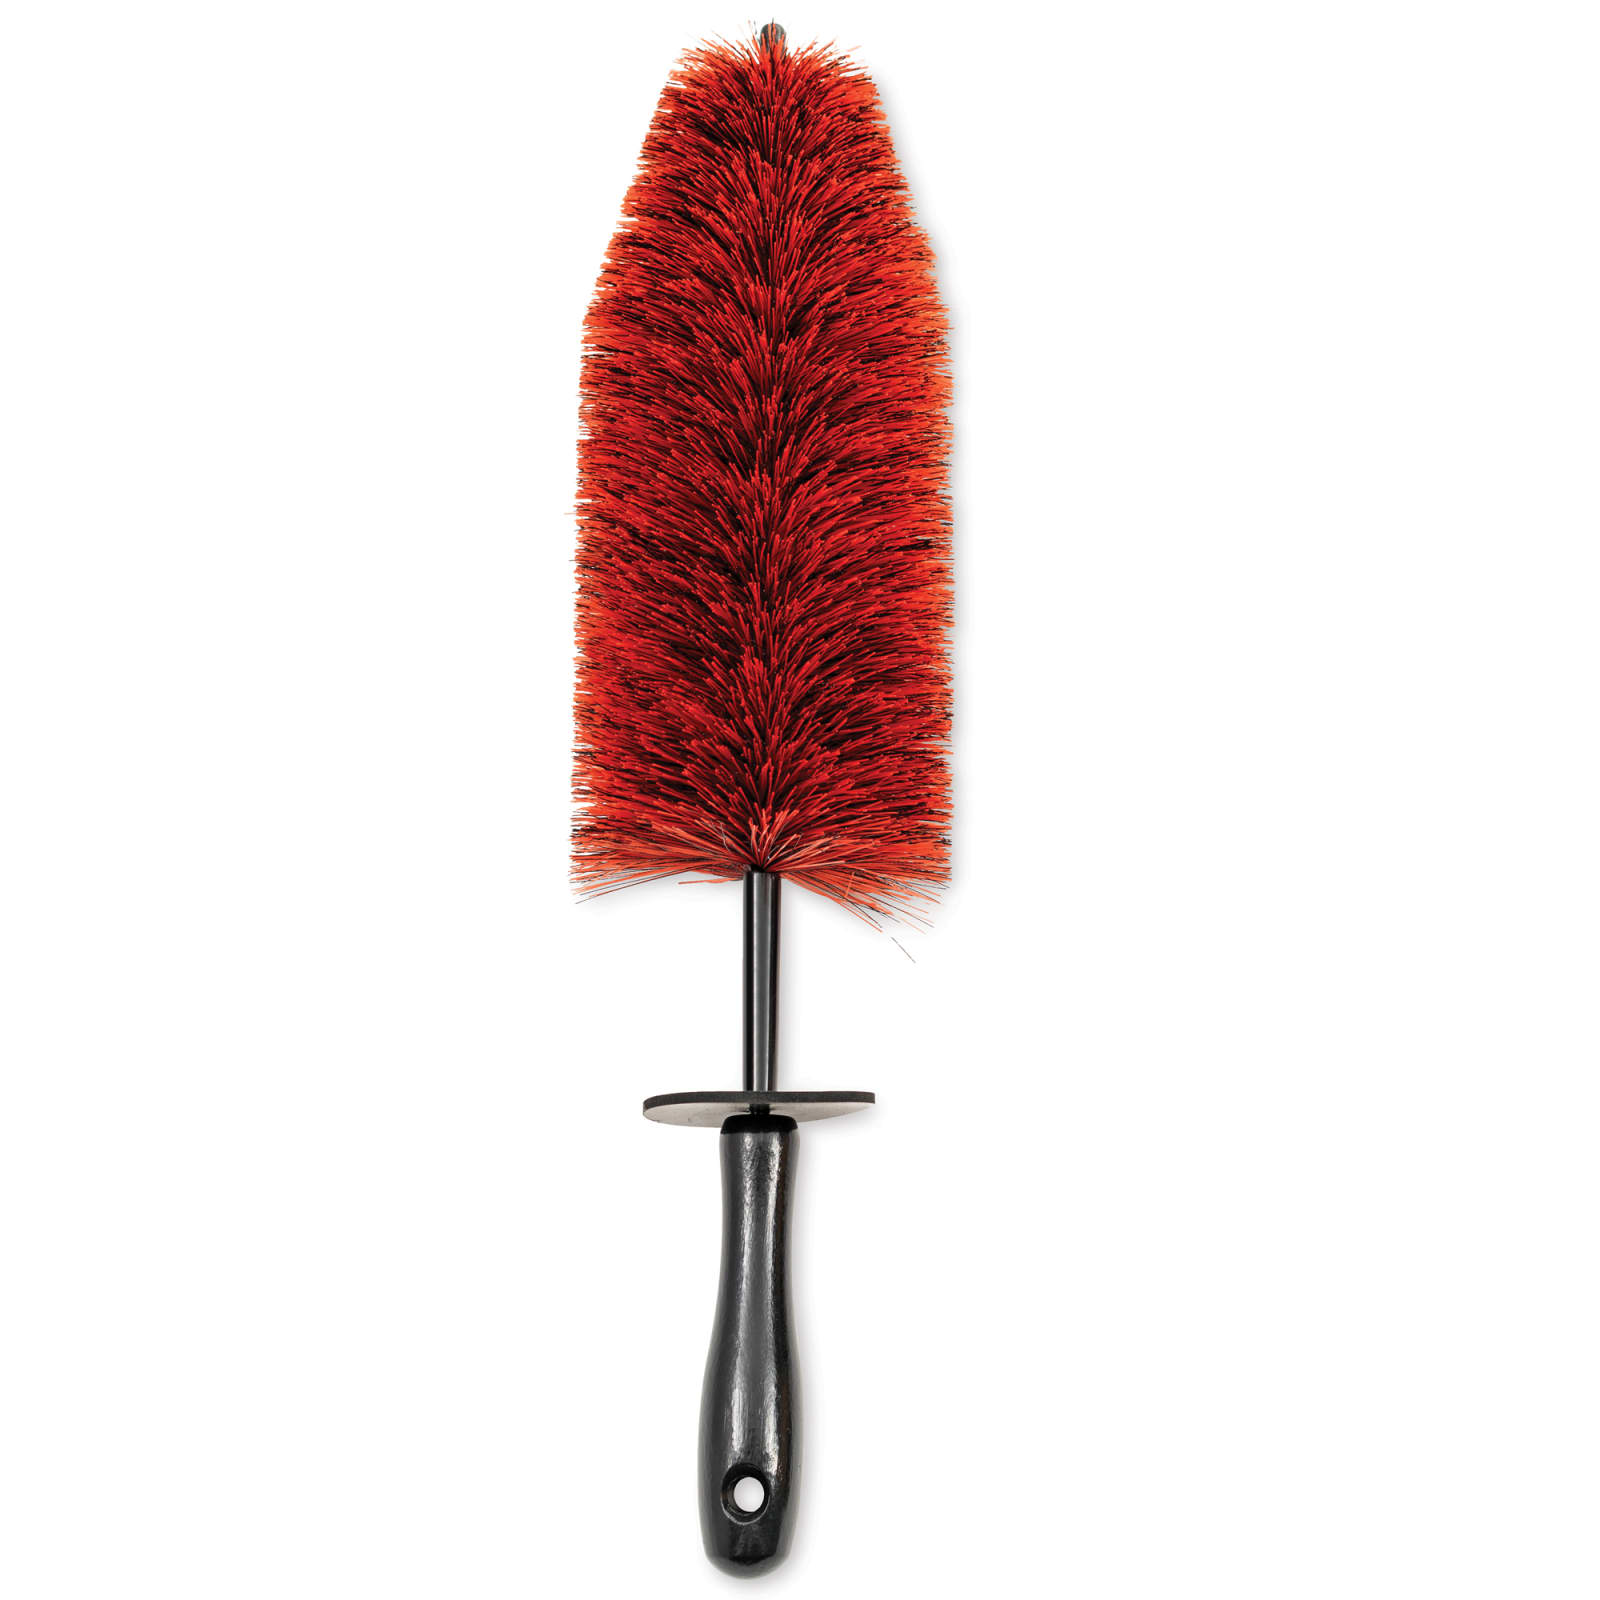 Wheel Brush: Types, Uses, Features and Benefits